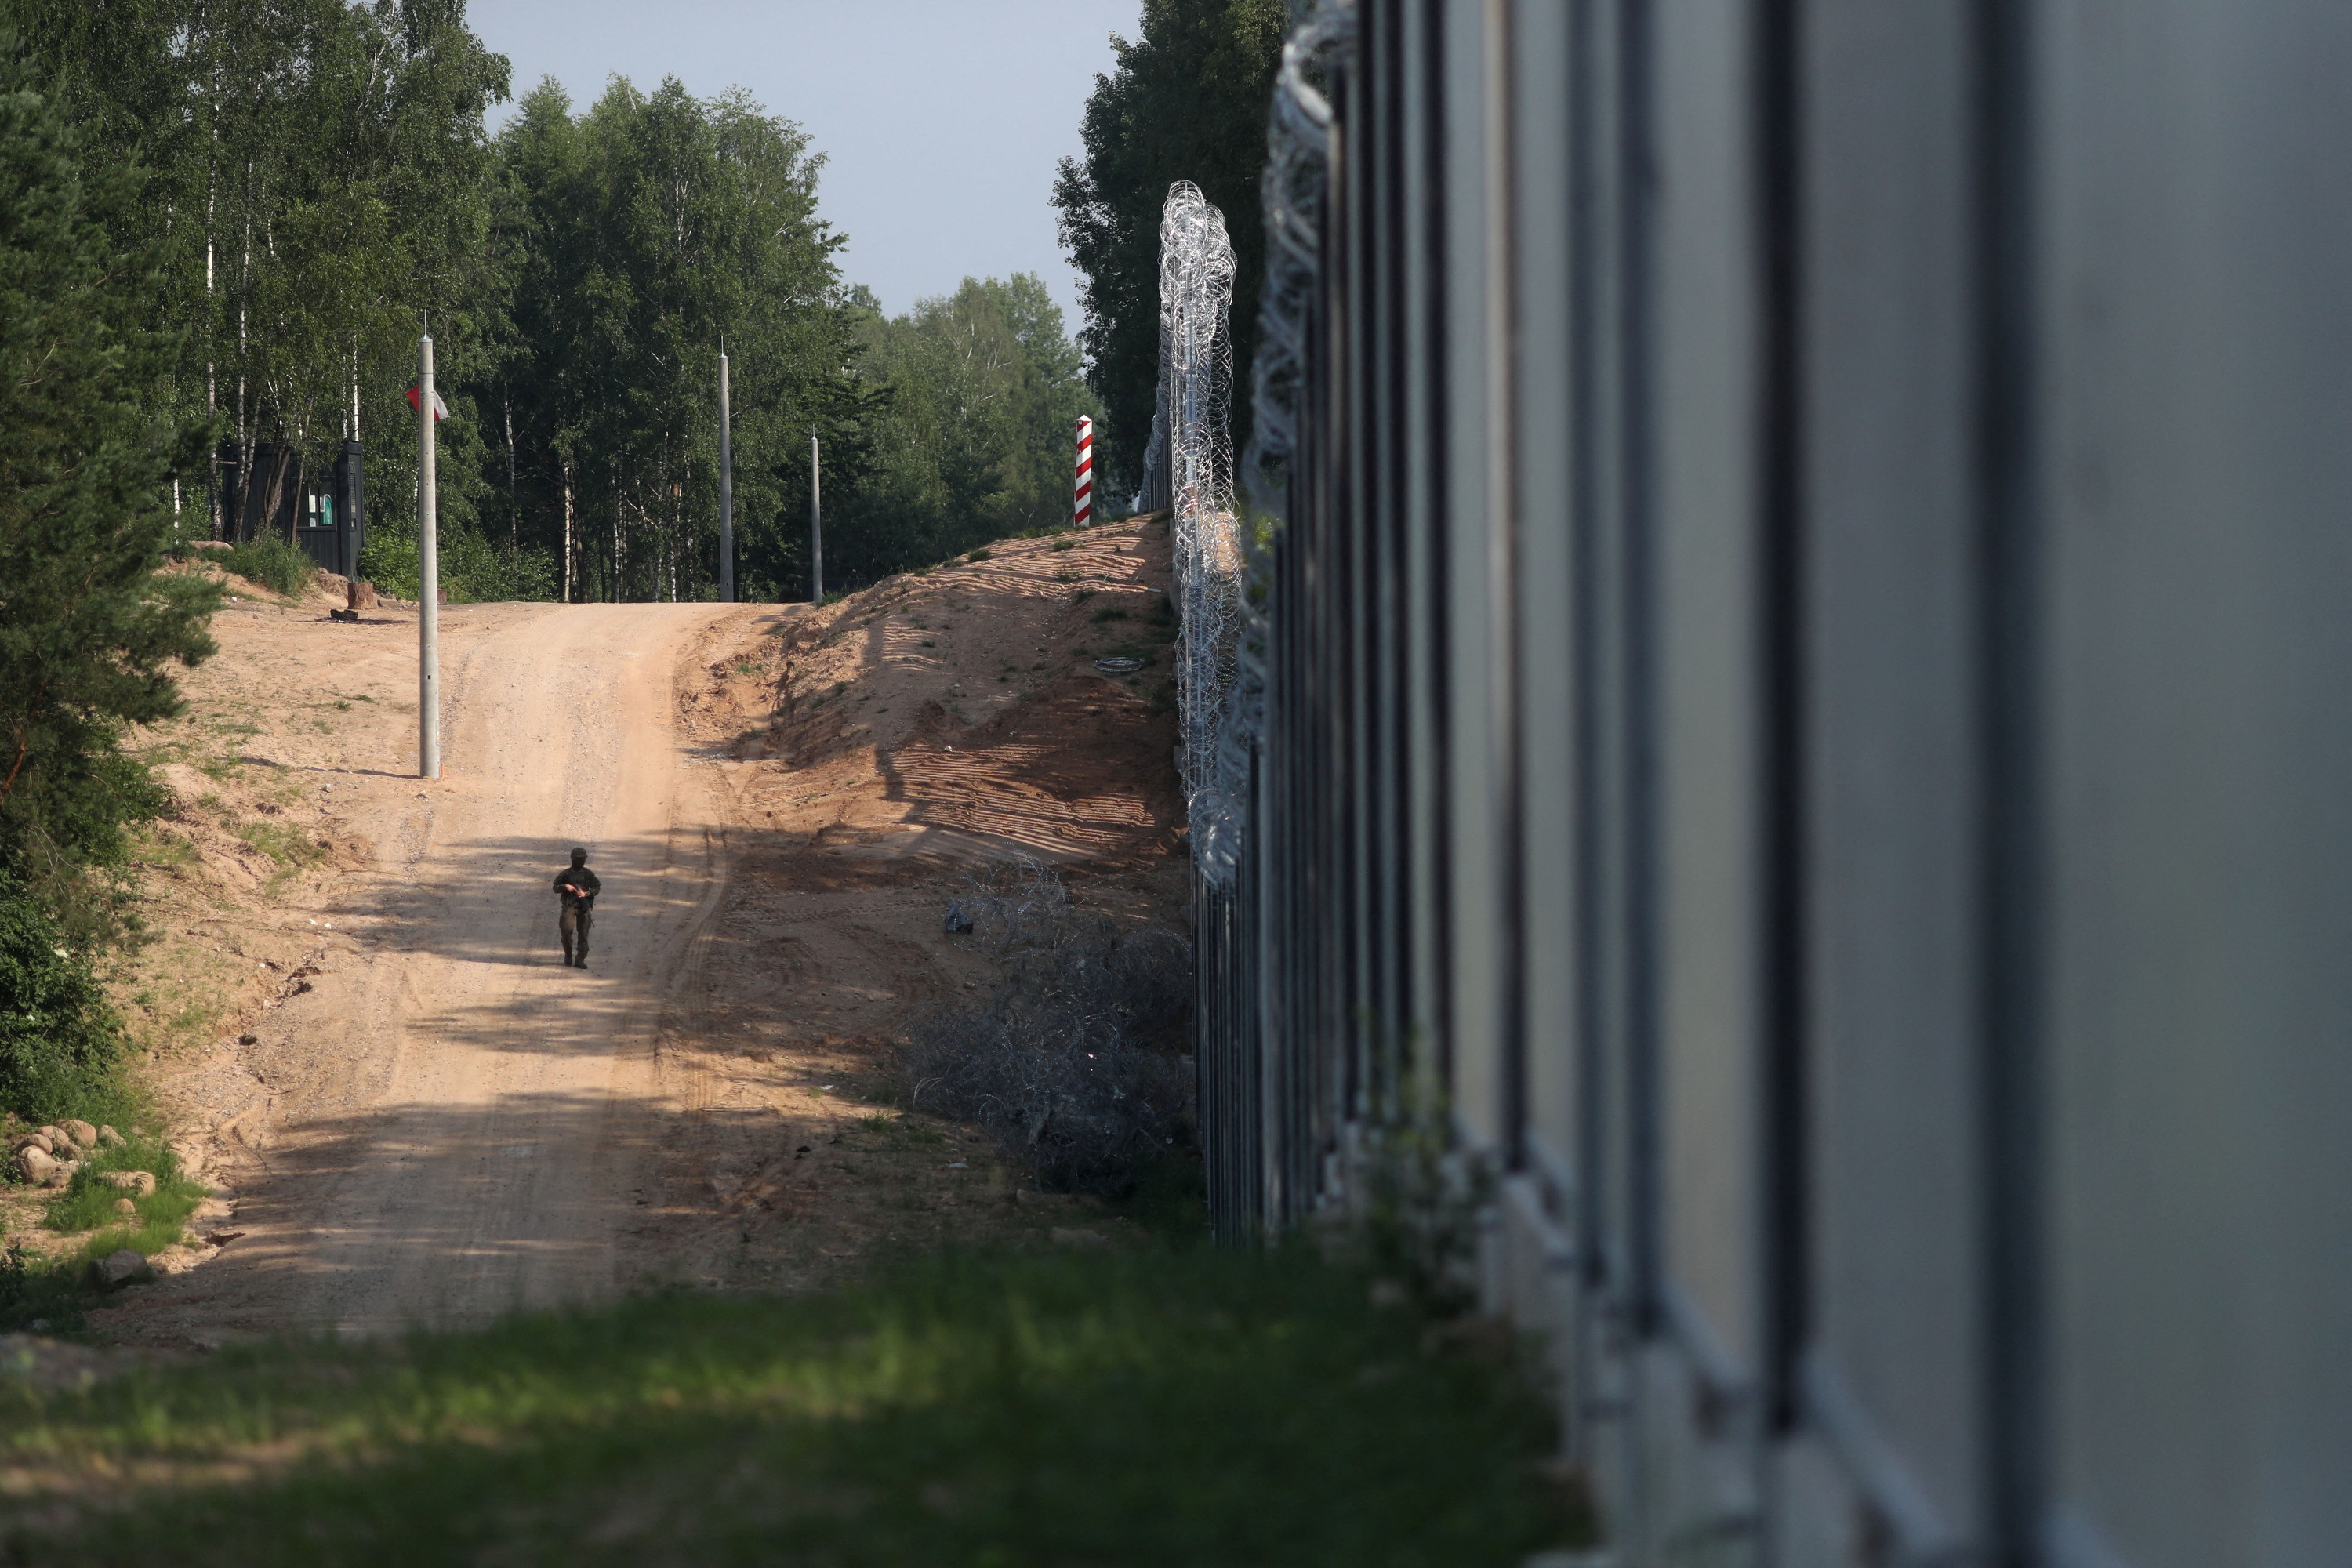 Soldier patrols by the wall erected to prevent migrant crossings on the Polish-Belarusian border, near Kuznica